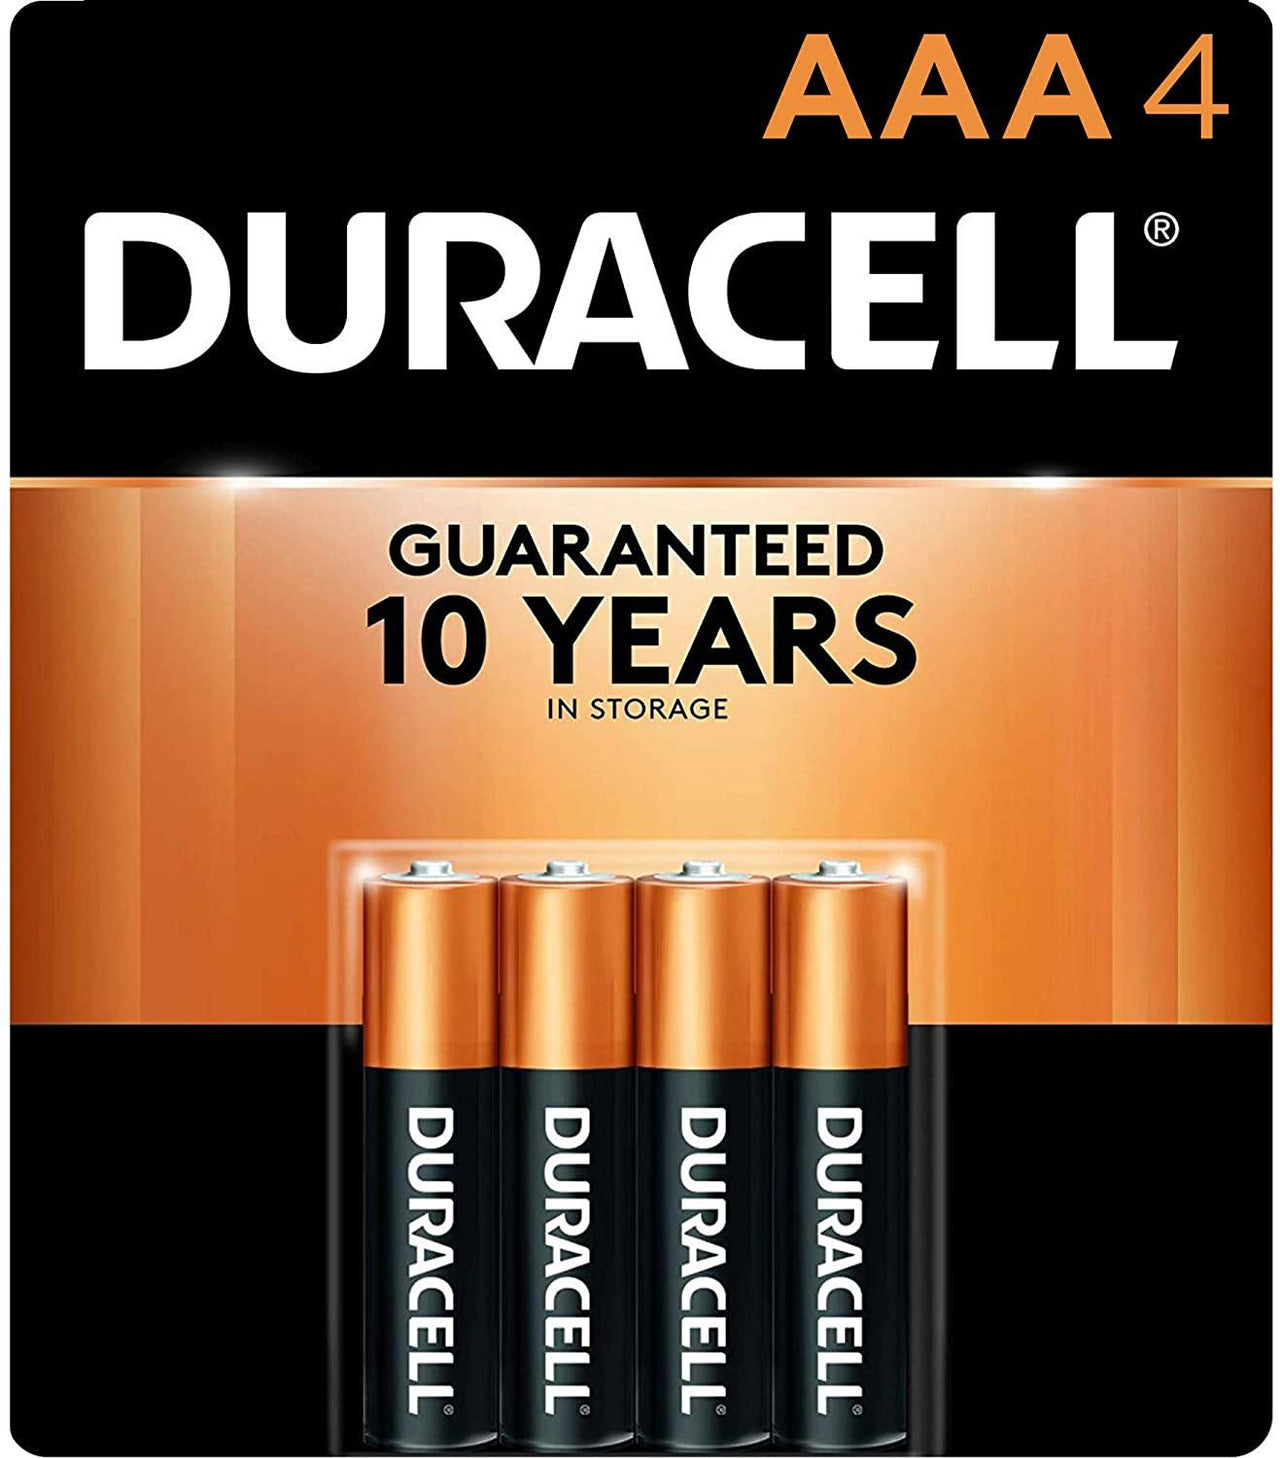 Duracell Batteries (AAA) 2400 Alkaline Cell Pack of 4 Batteries Simply Duracell - 10 Packs - sassydeals.co.uk